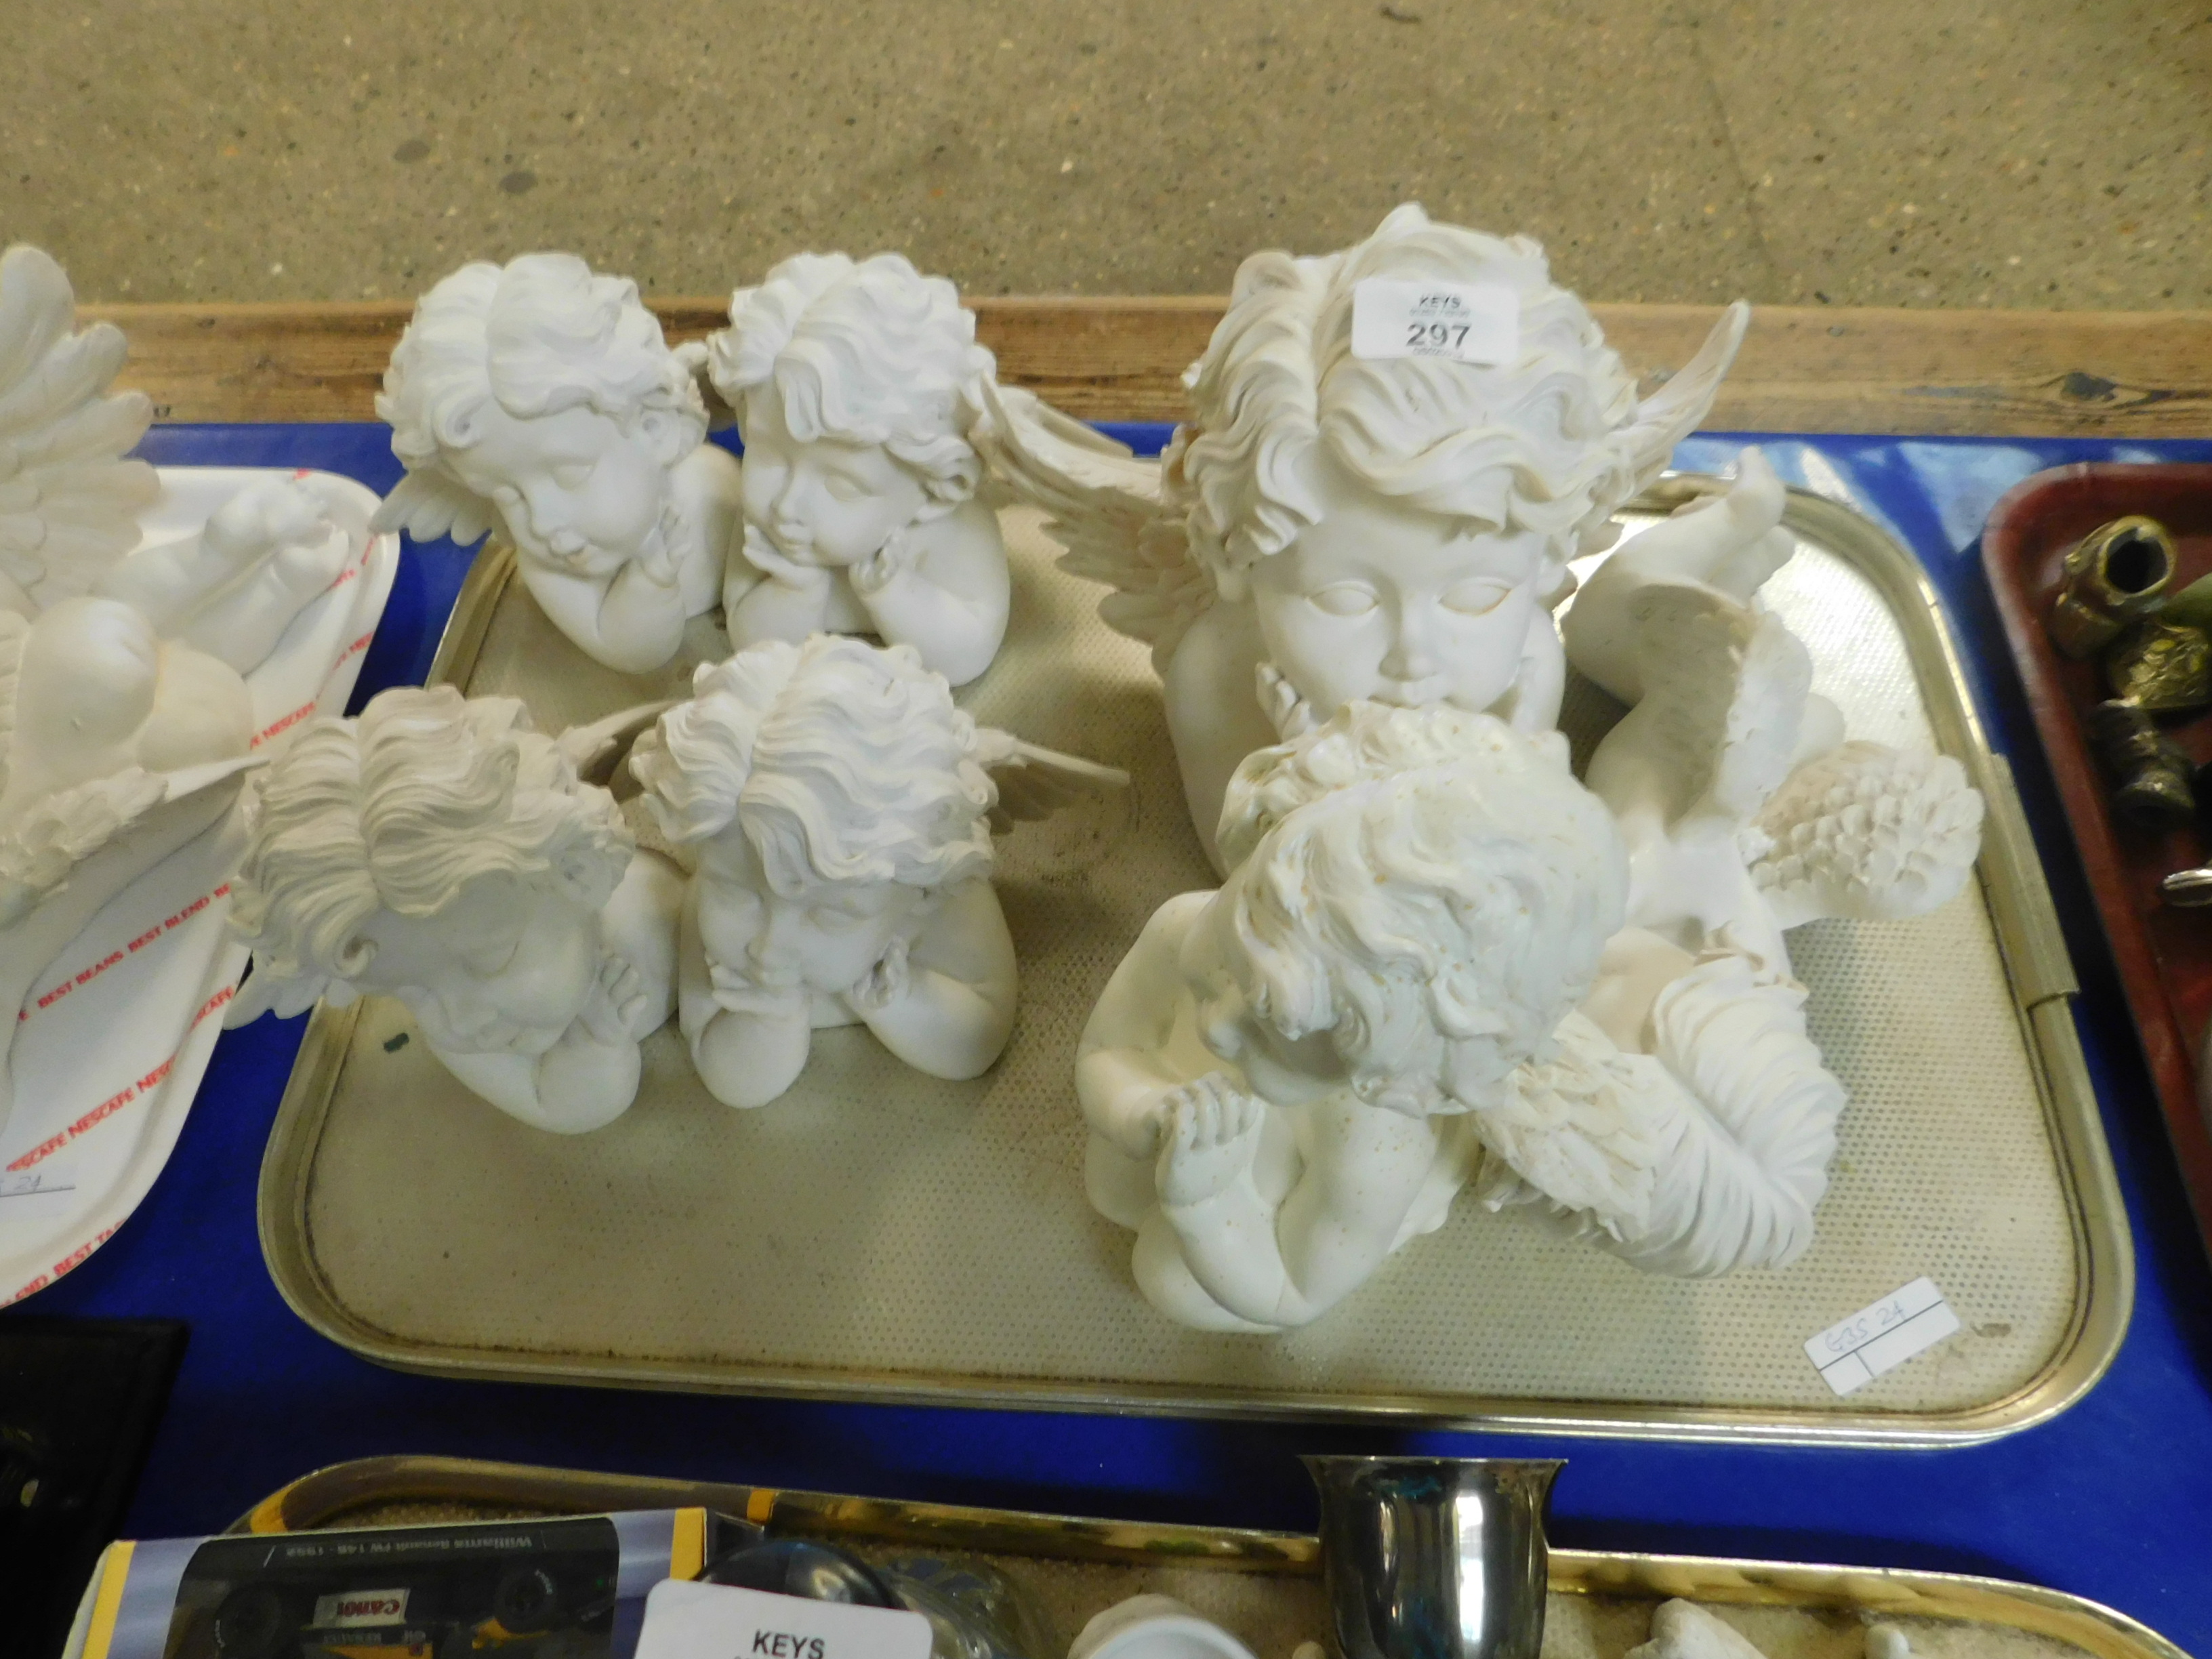 TRAY OF SEVEN PLASTER WORK PUTAI ORNAMENTS